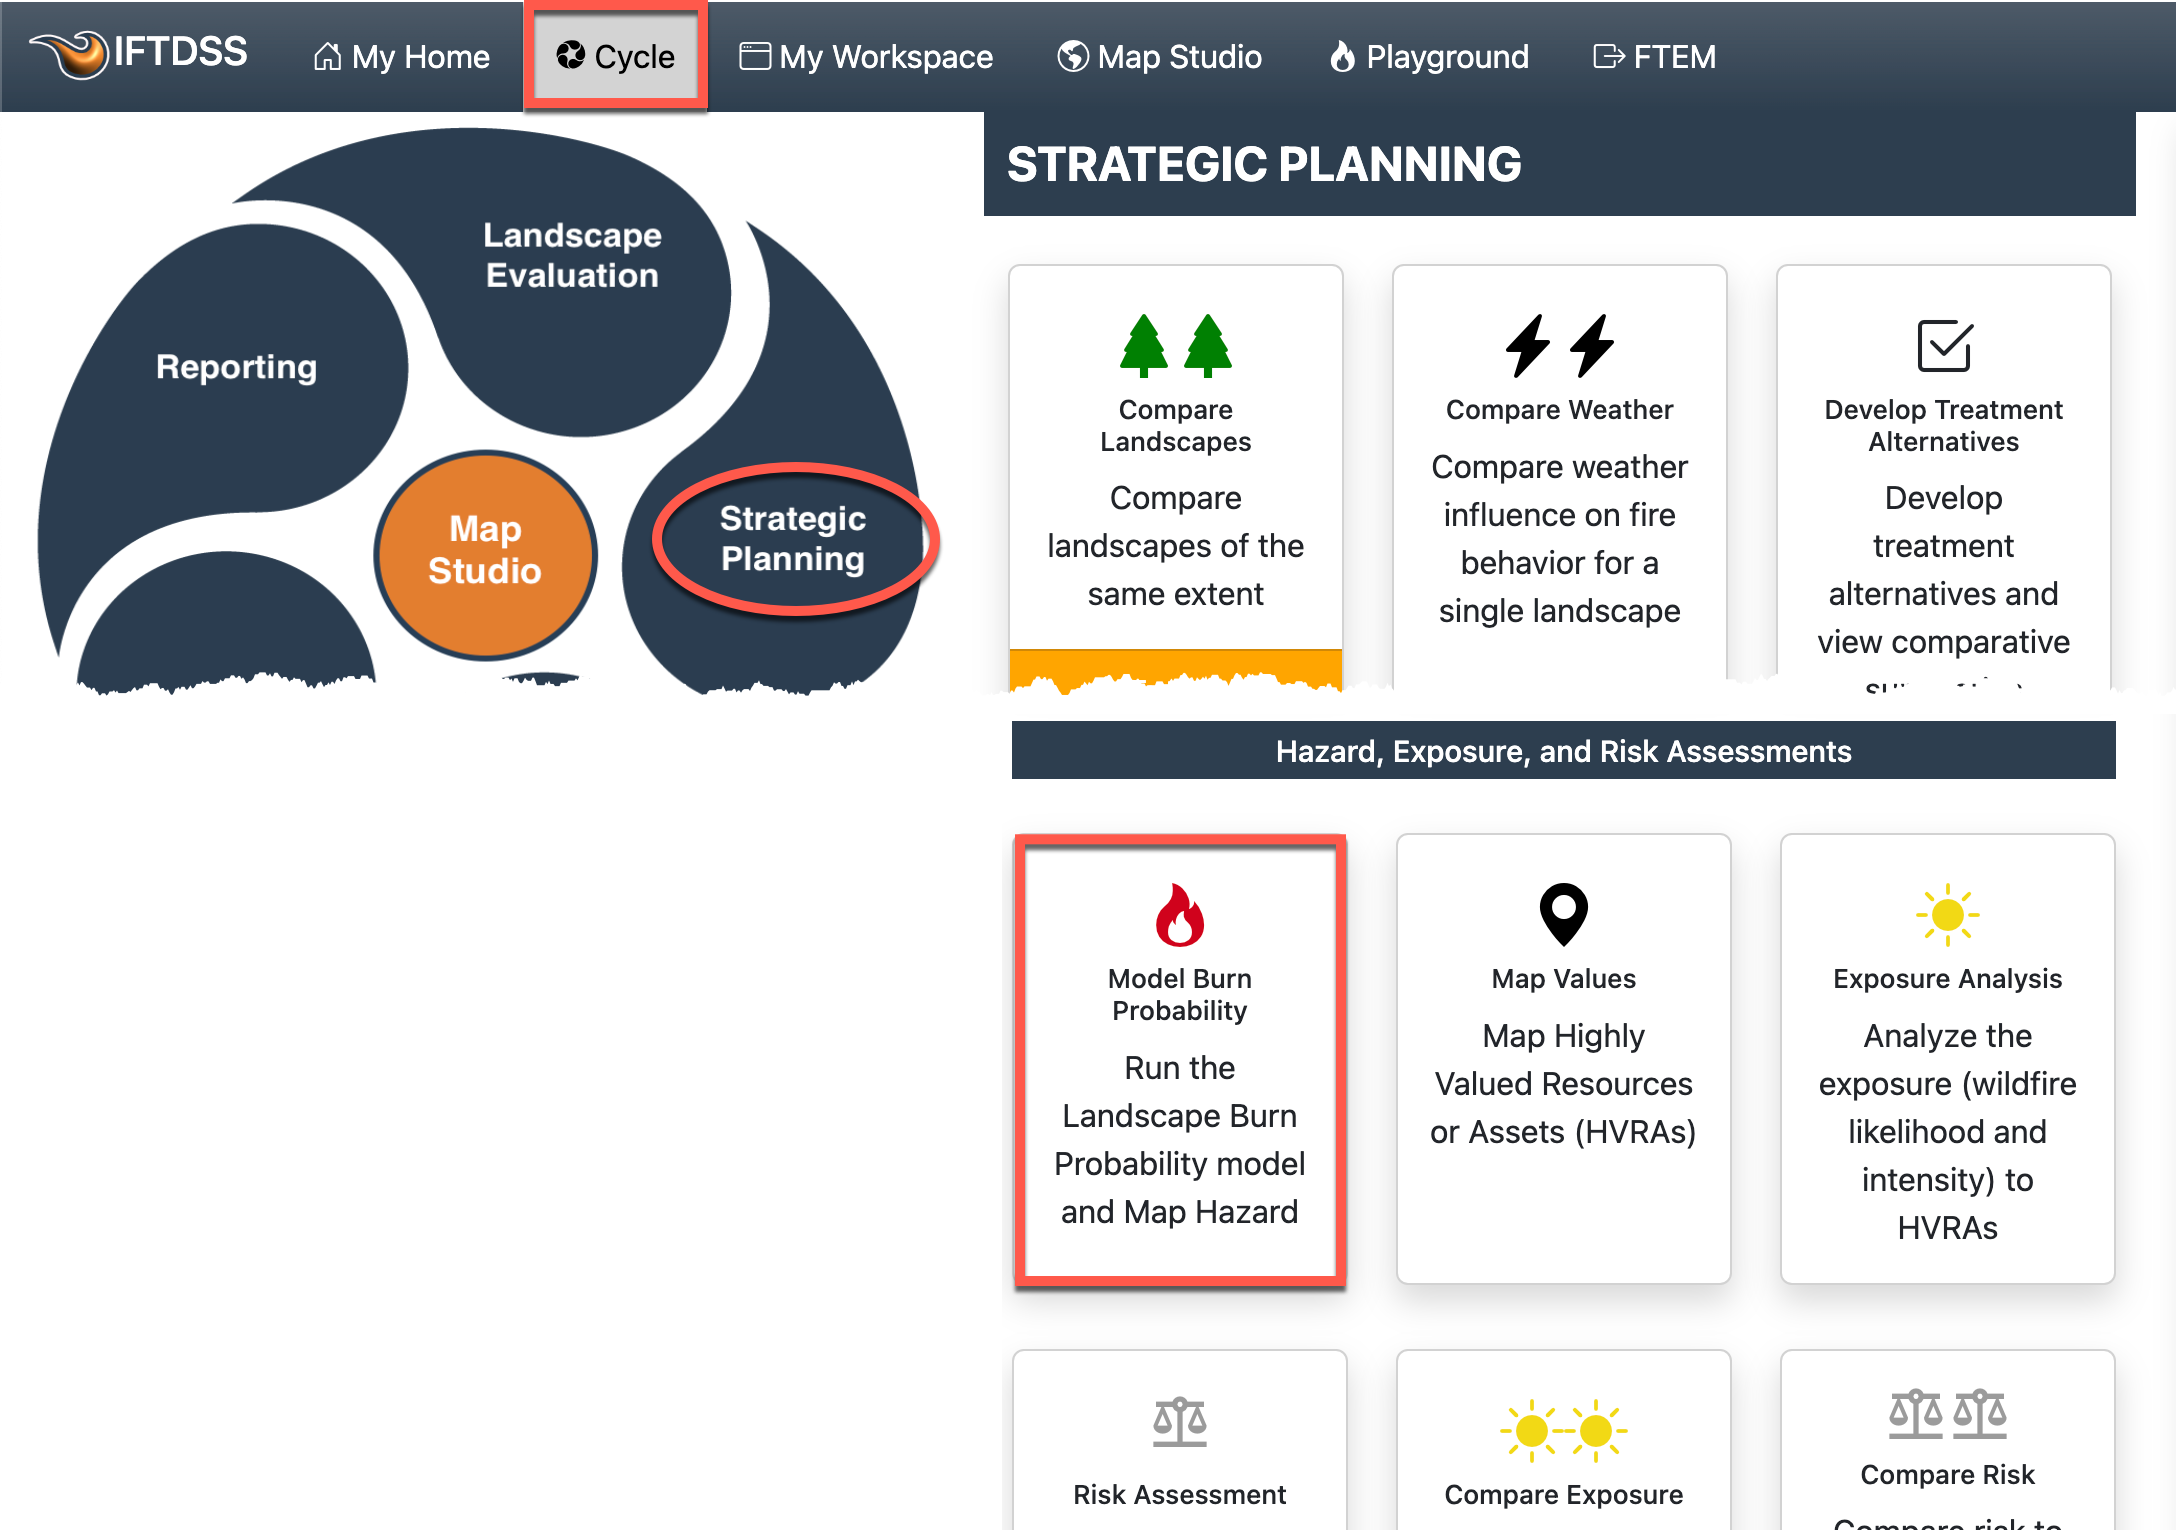 strategic planning stage of the cycle with the Landscape Burn Probability option in the bottom left